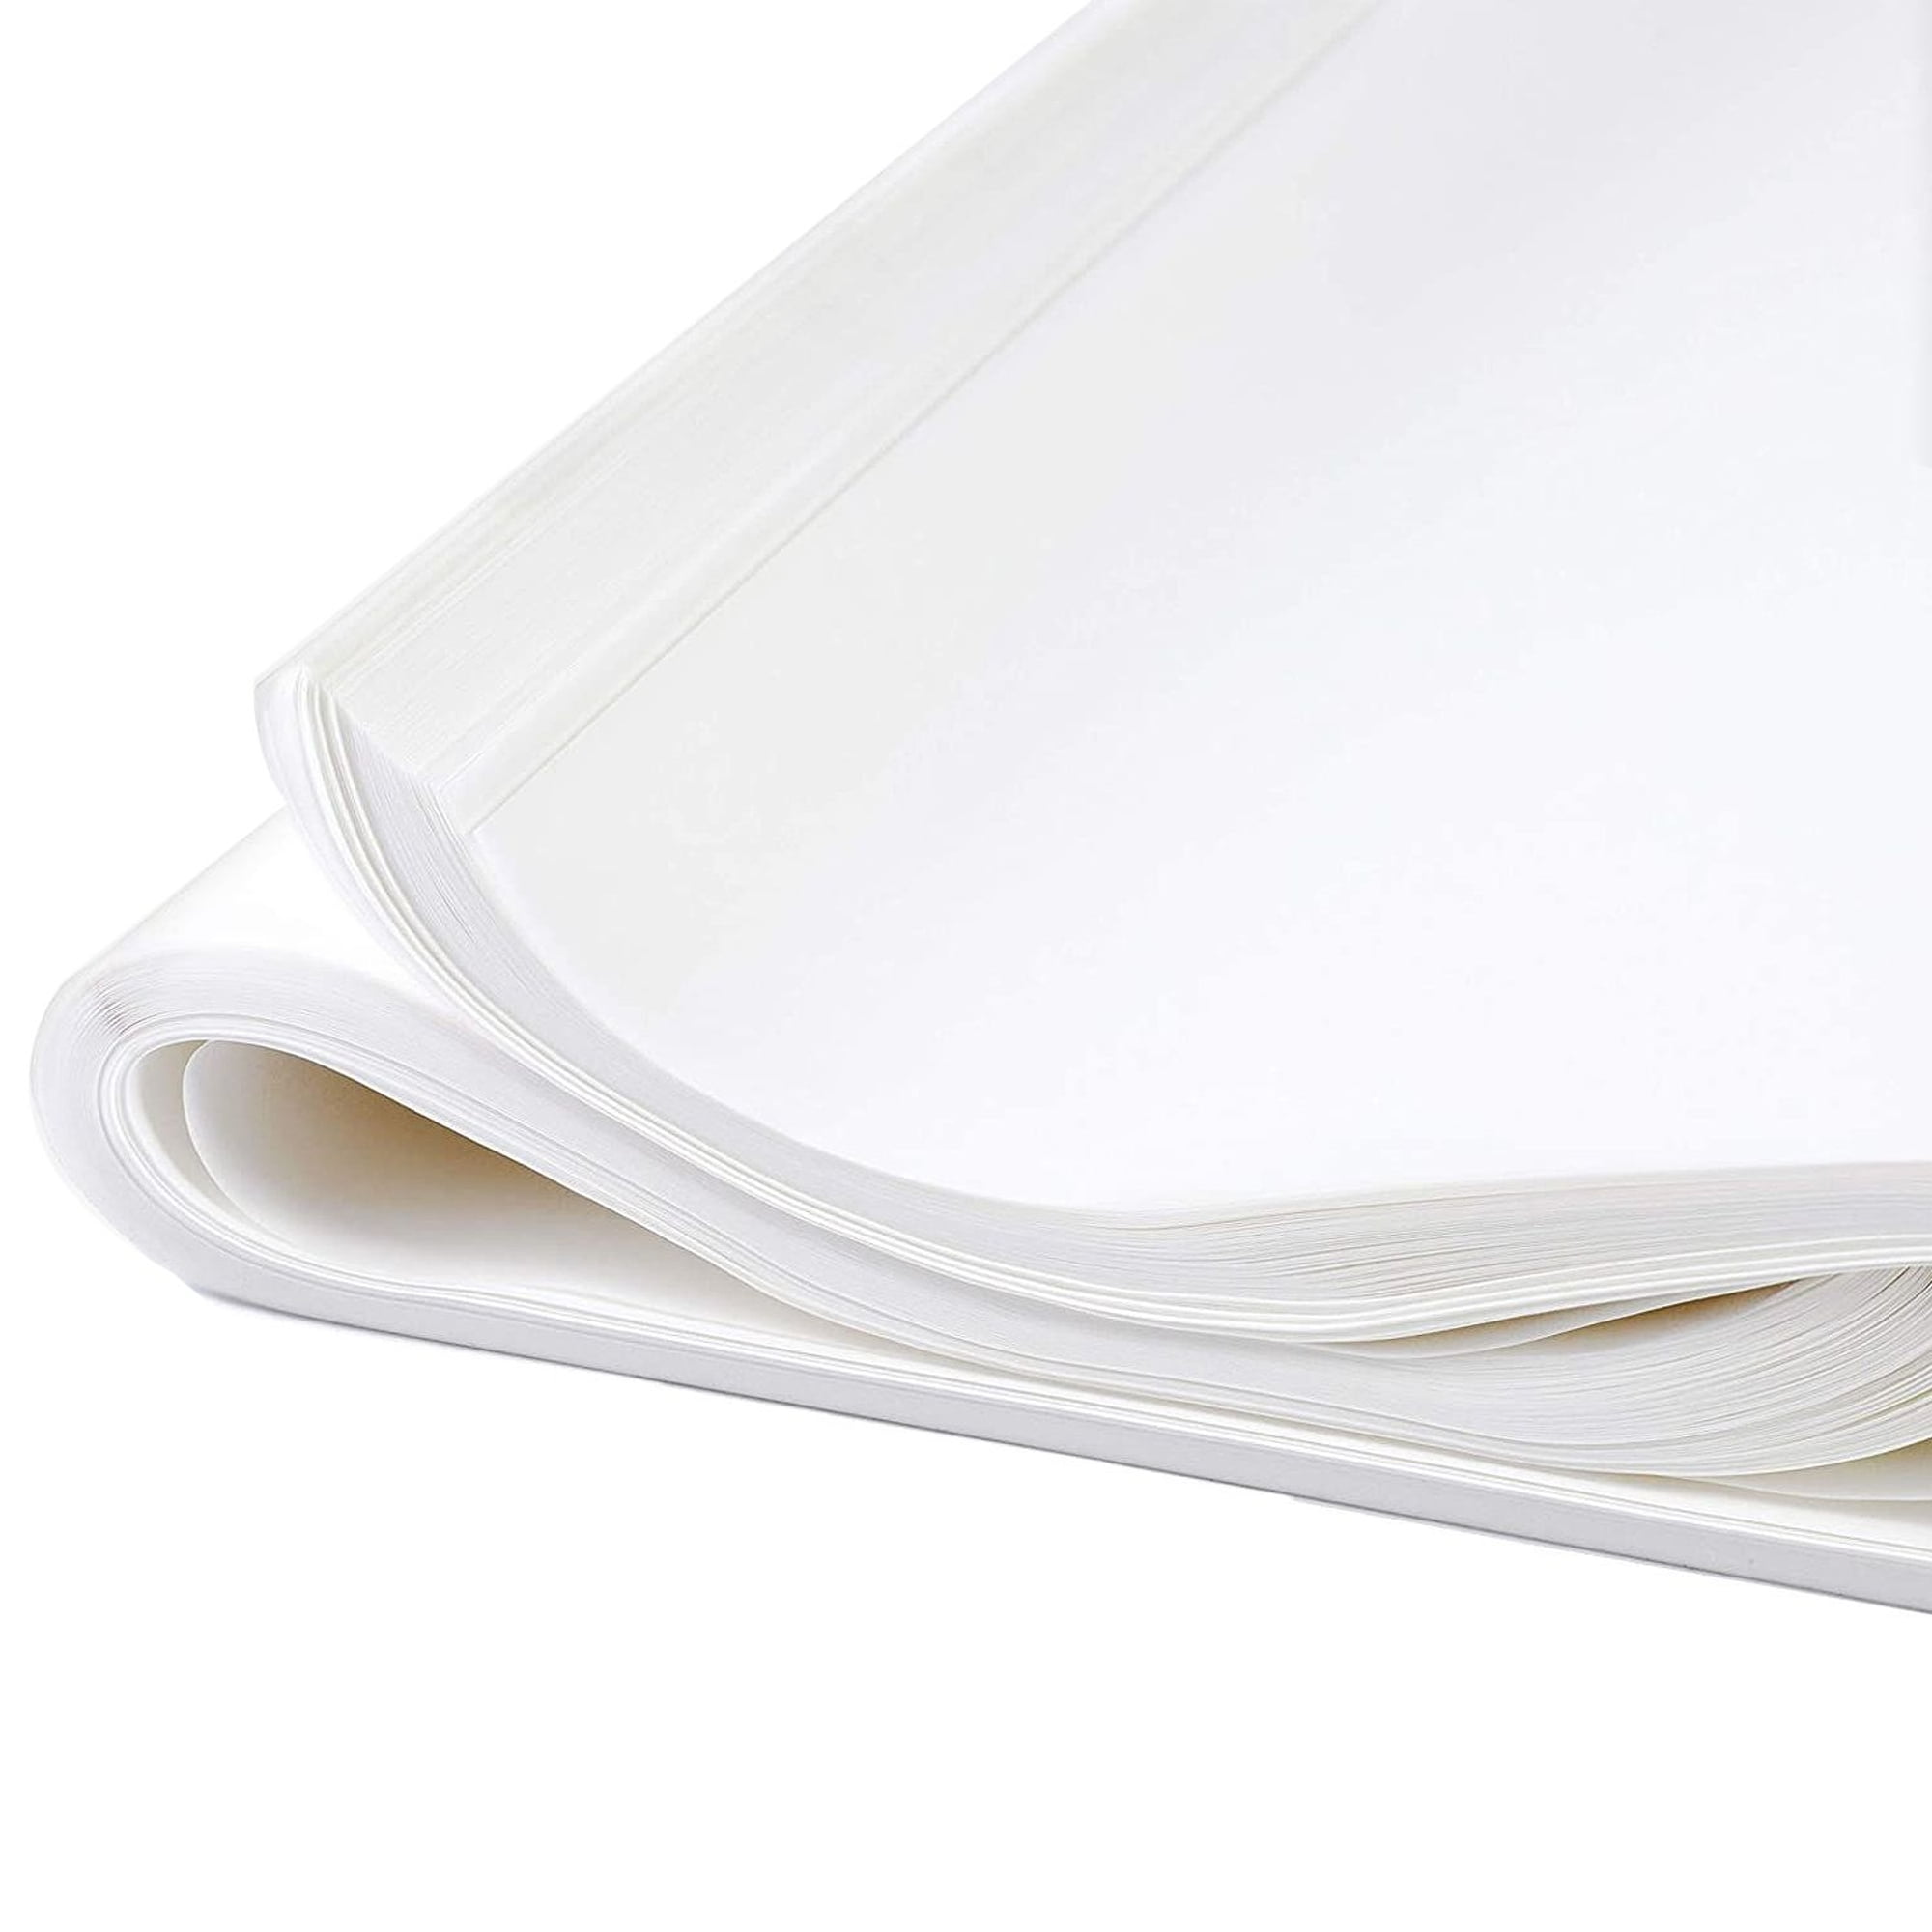  Glassine Paper Sheets - 100 Pack Glassine Paper for Artwork,  Protecting Photos, Printings, Documents, Baked Goods, Pastries, 16 x 20  inches : Office Products